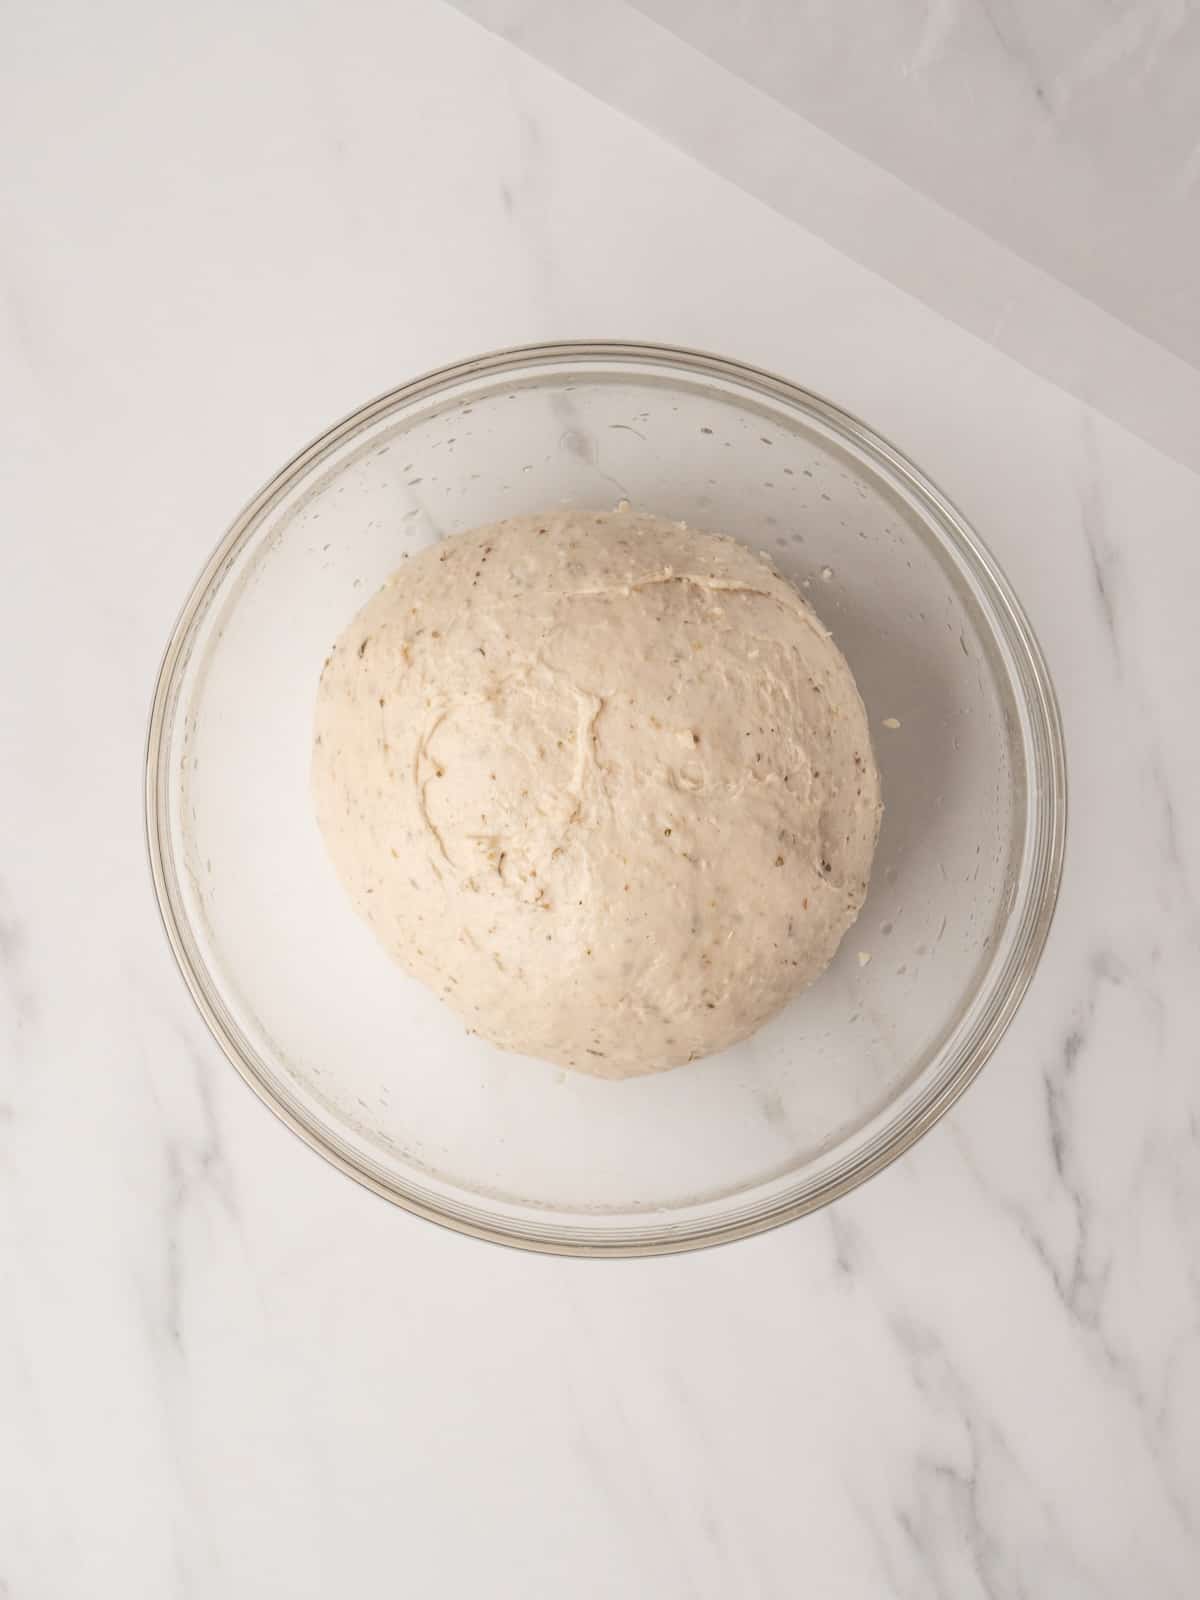 A greased large glass mixing bowl with the pretzel dough just kneaded and rolled into a ball.